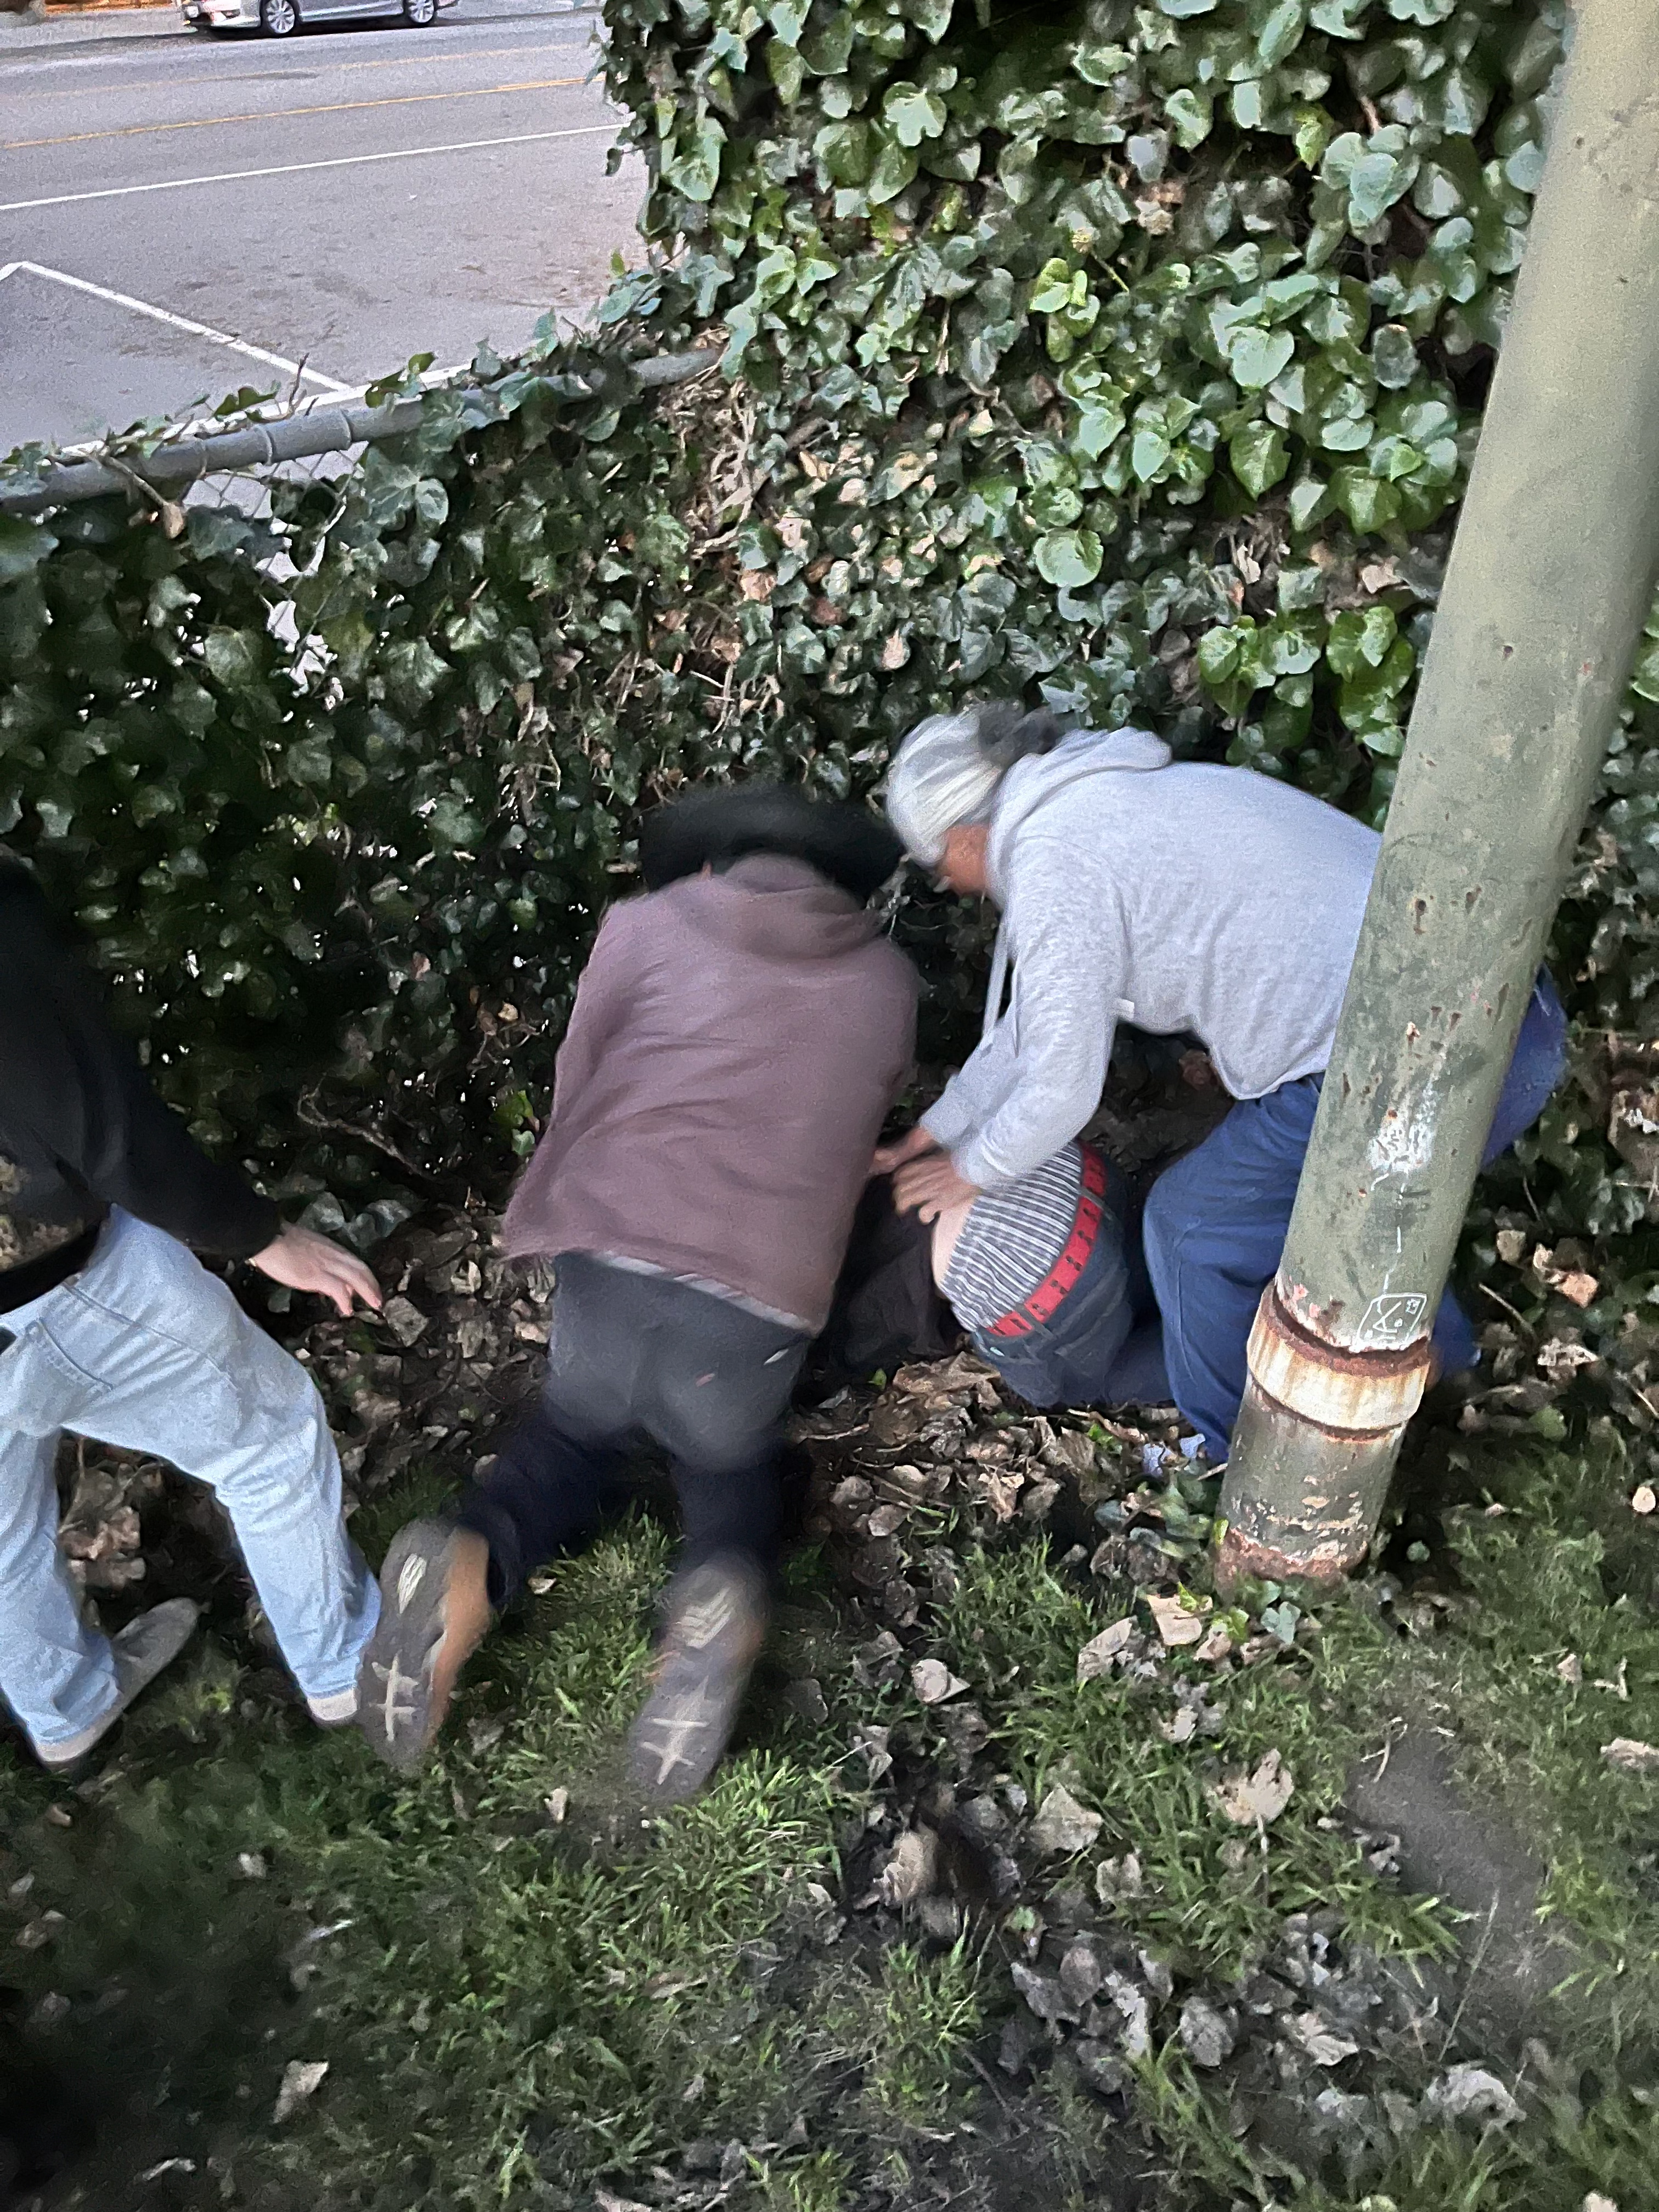 Three people hold down a fourth person on the ground by a power pole near a chain link fence overgrown with hedges just steps from a street.